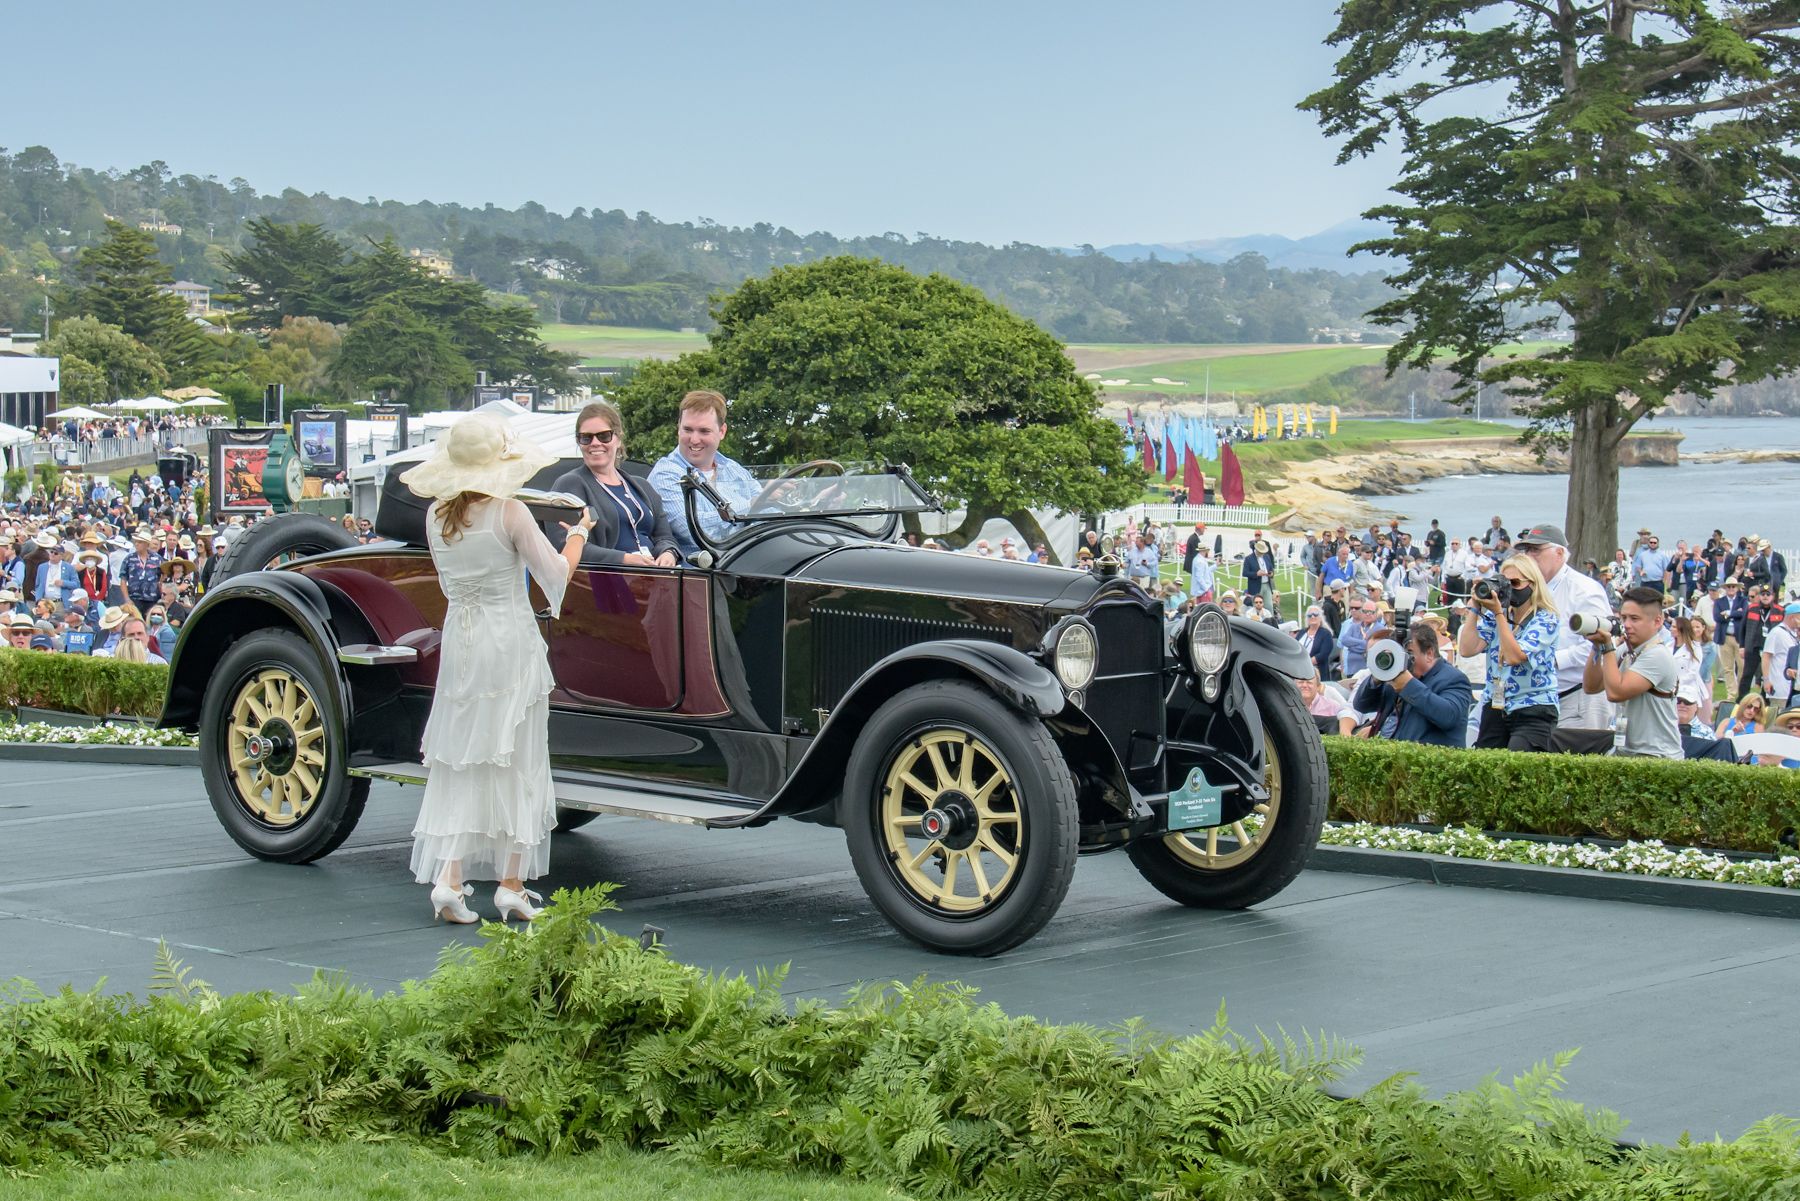 Check Out Every Winner From The 2021 Pebble Beach Concours d'Elegance